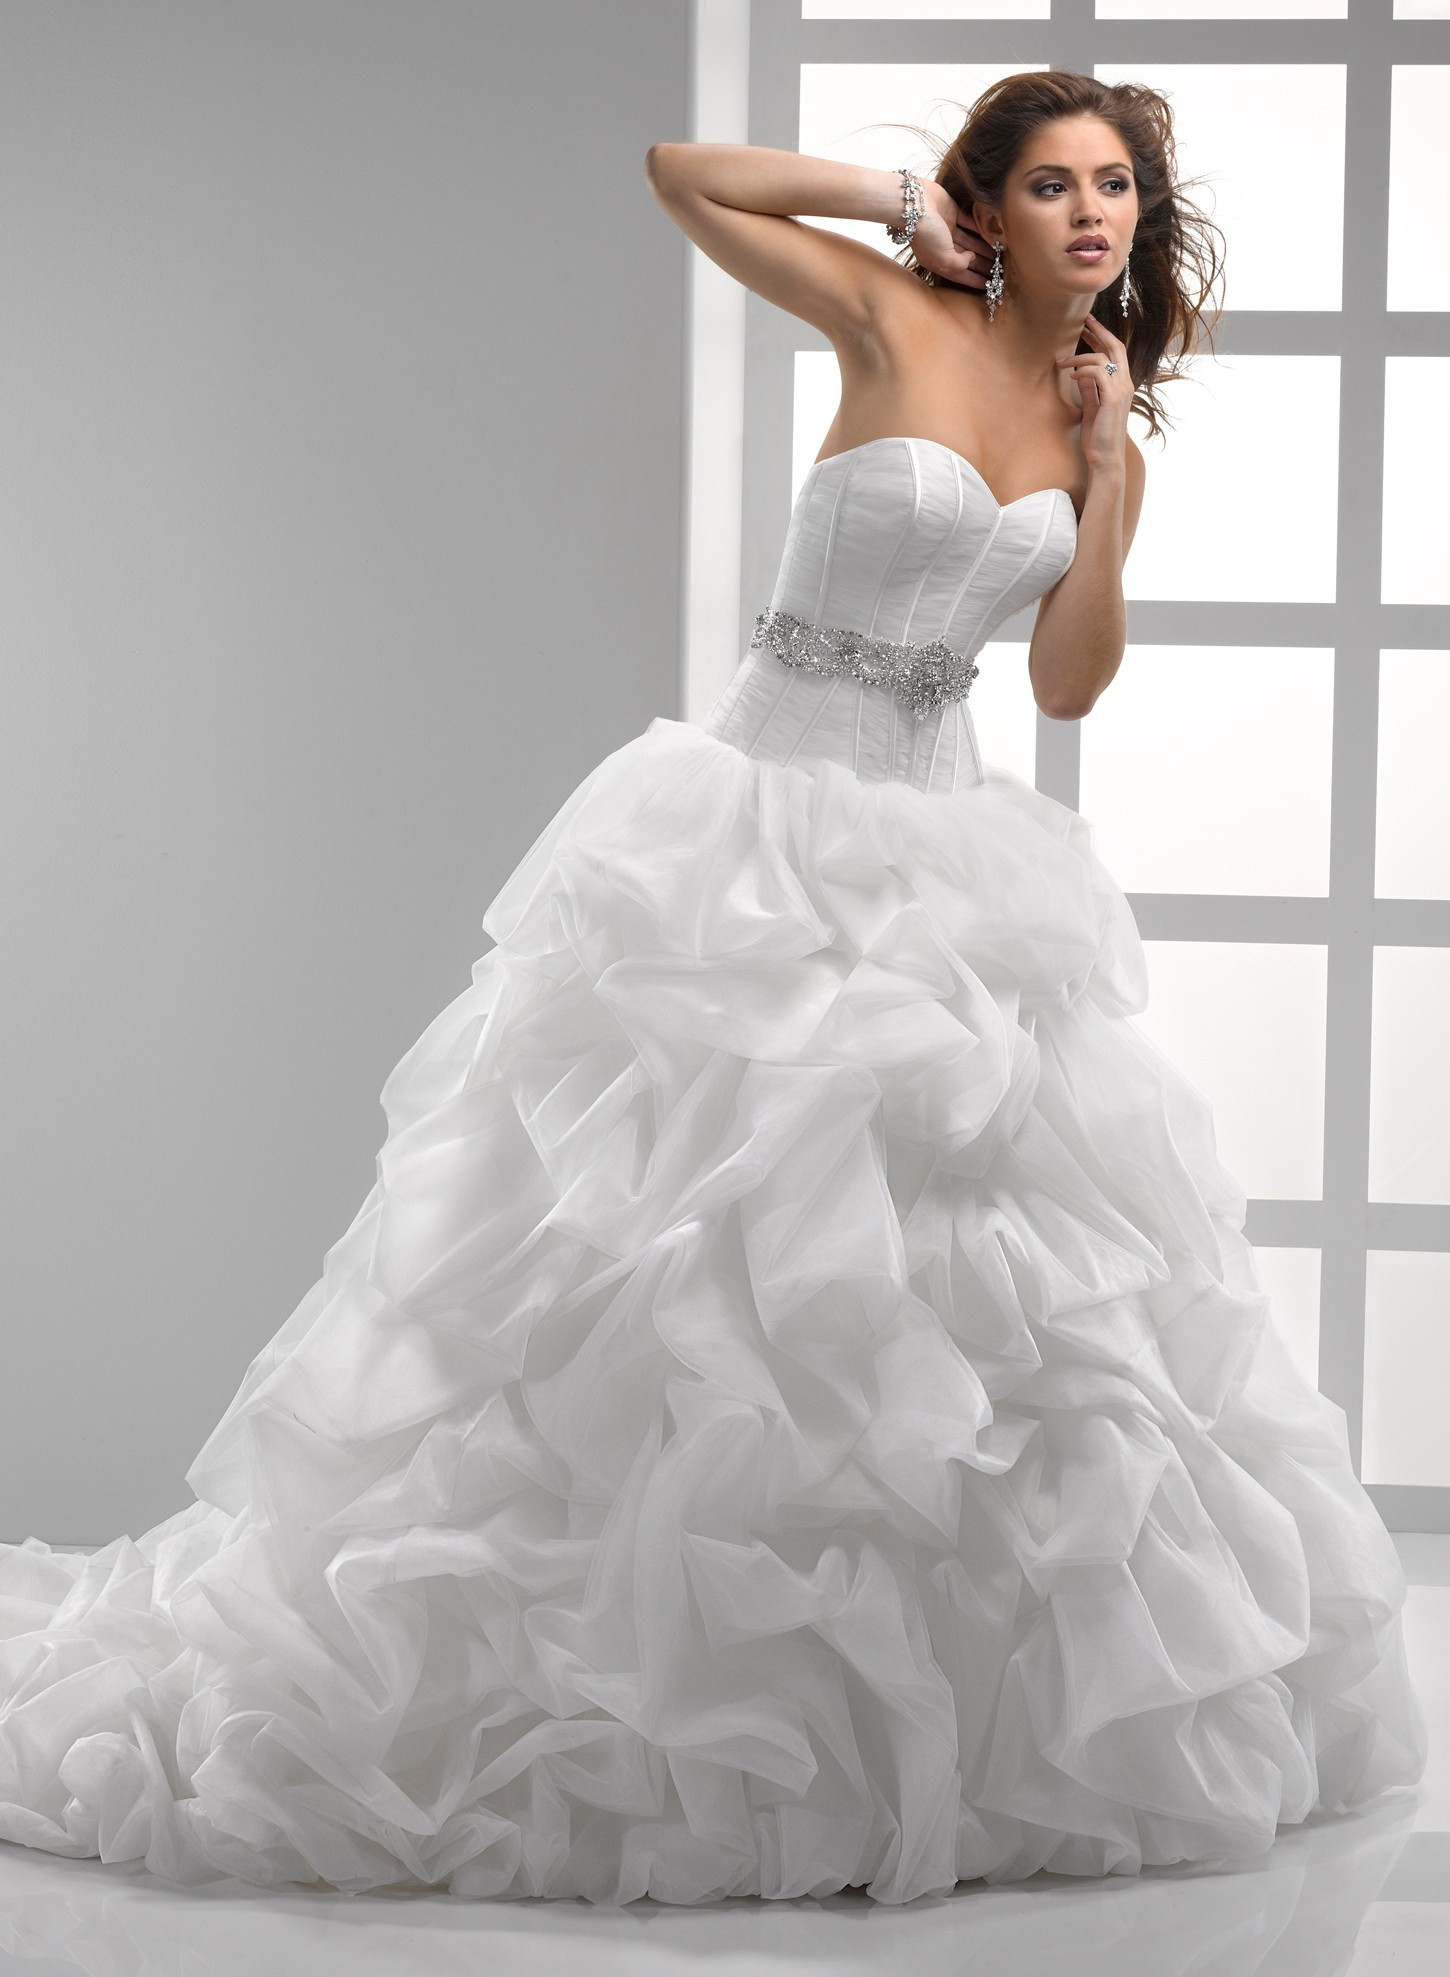 Wedding Ball Gowns
 The Irresistible Attraction of Ball Gown Wedding Dresses